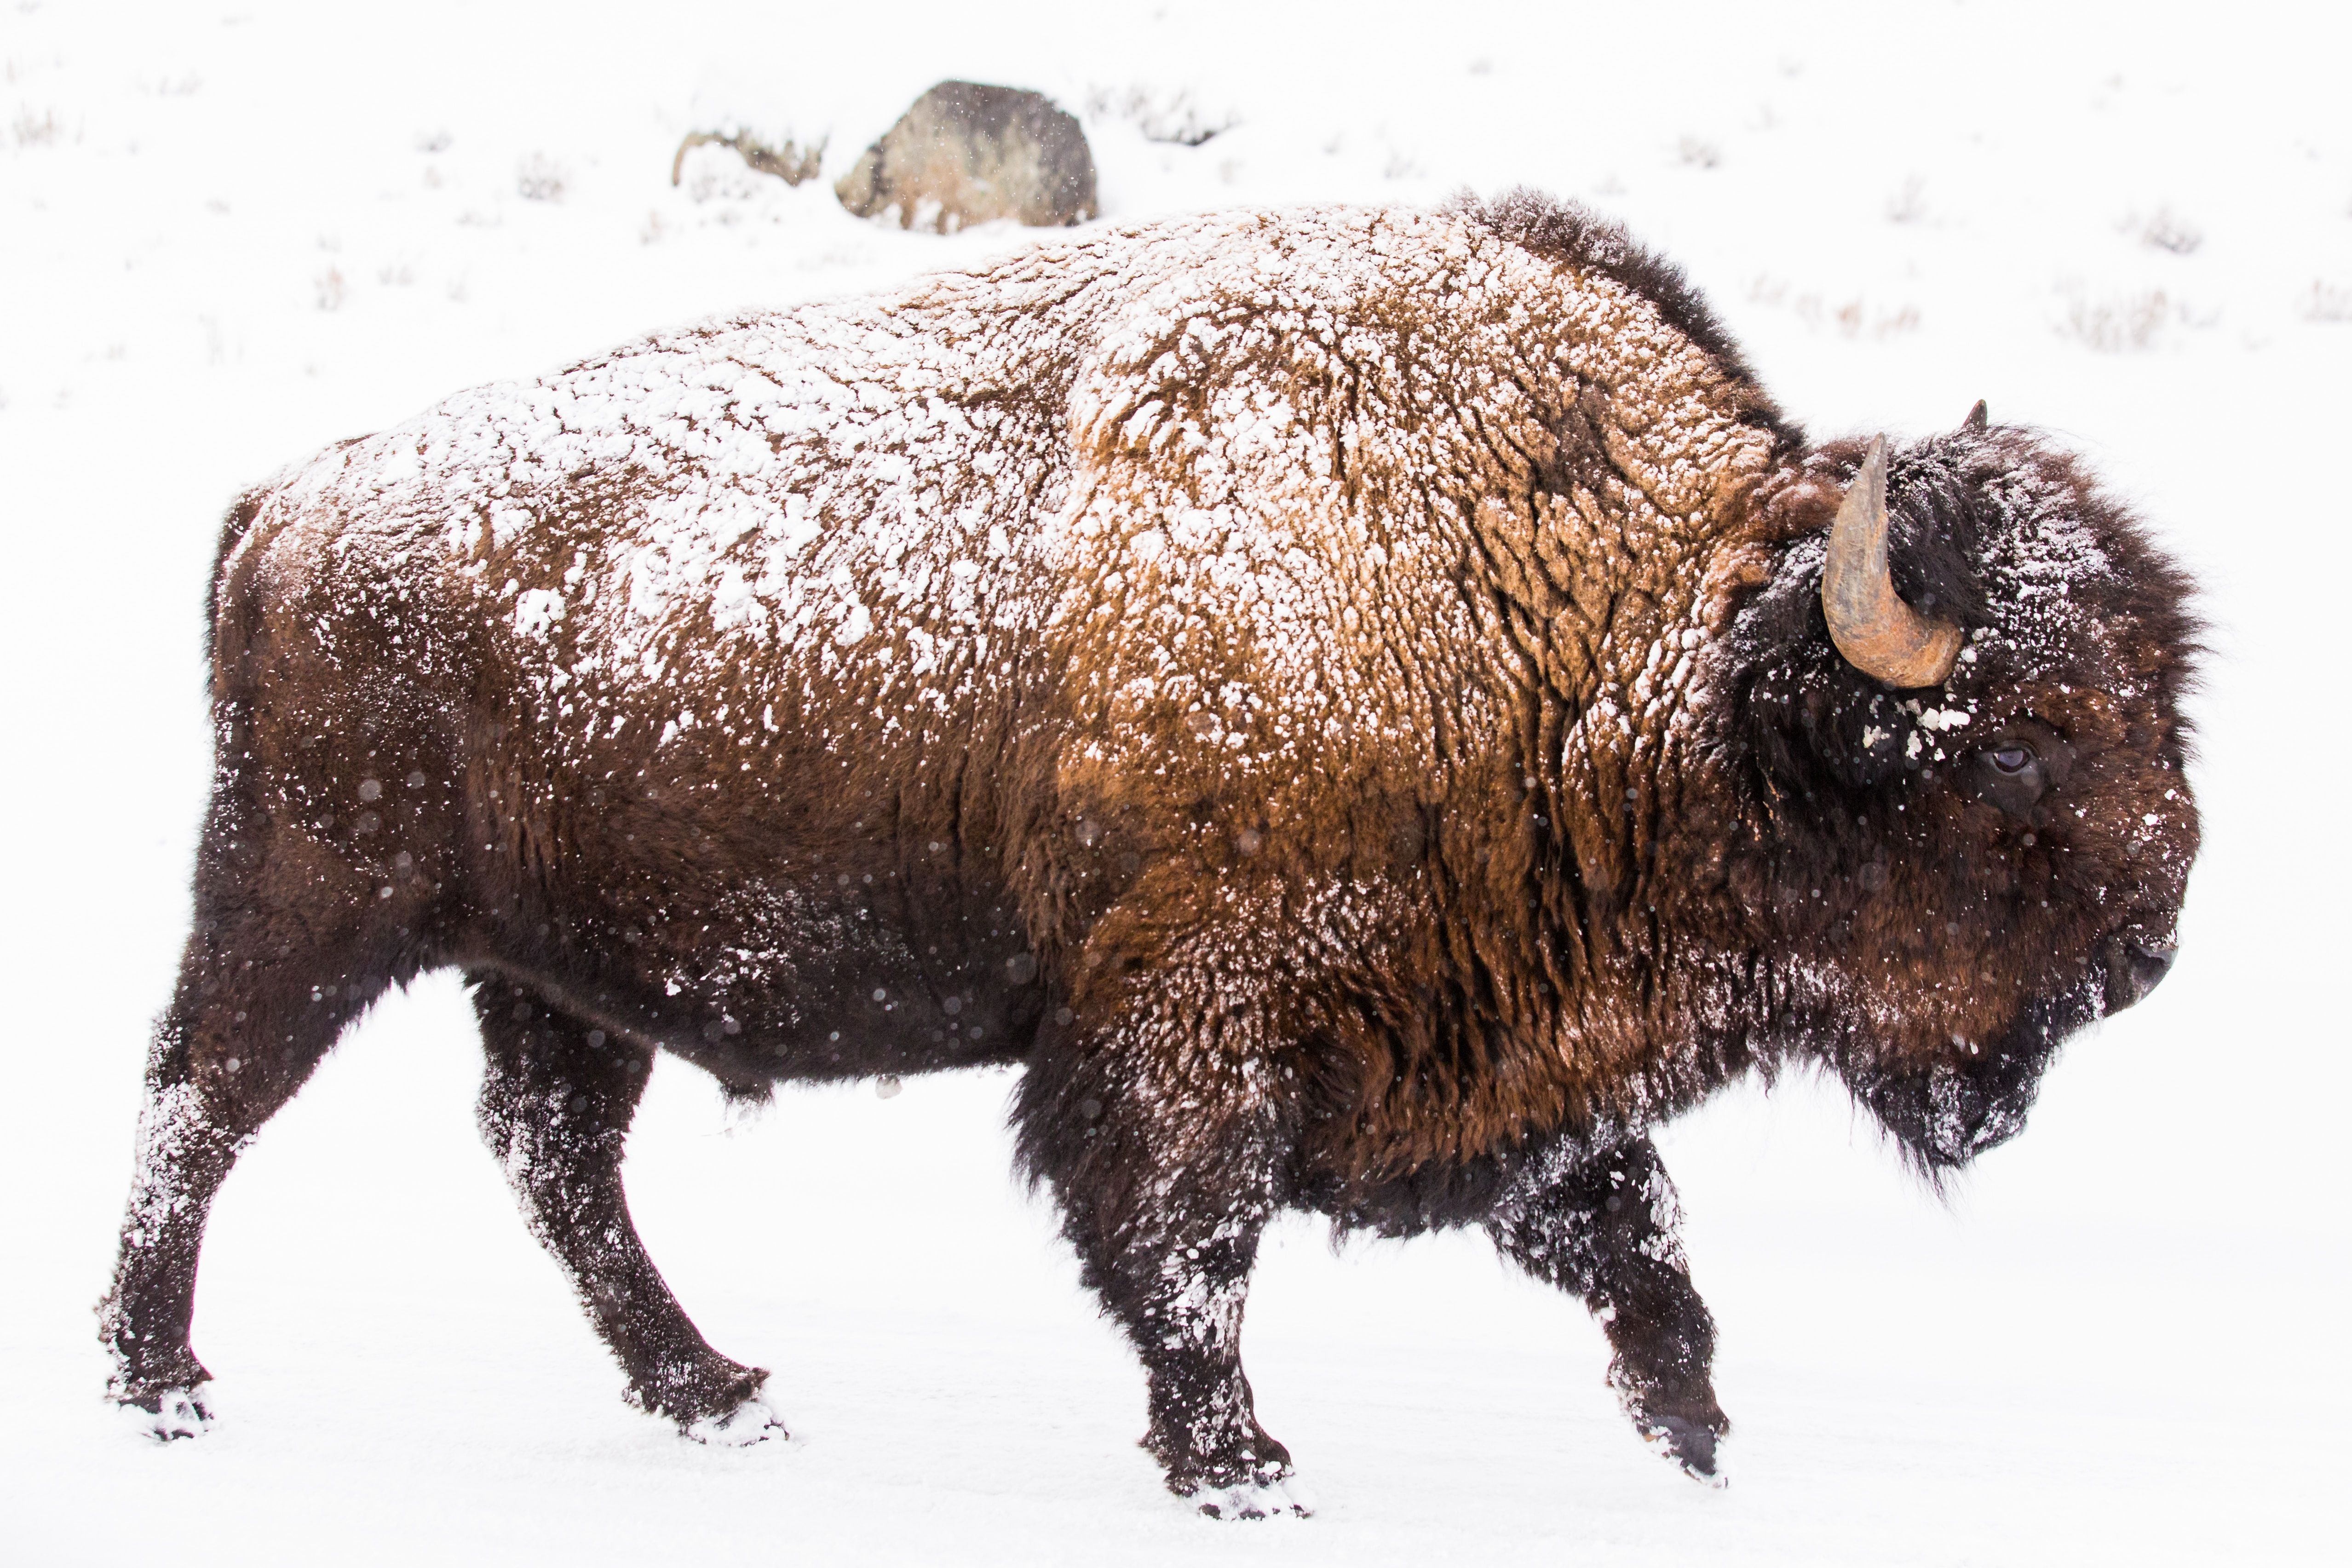 A male Bison (American Buffalo) trudgesw in Yellowstone National Park. (Photo credit to Lloyd Blunk) [5113 x 3409]